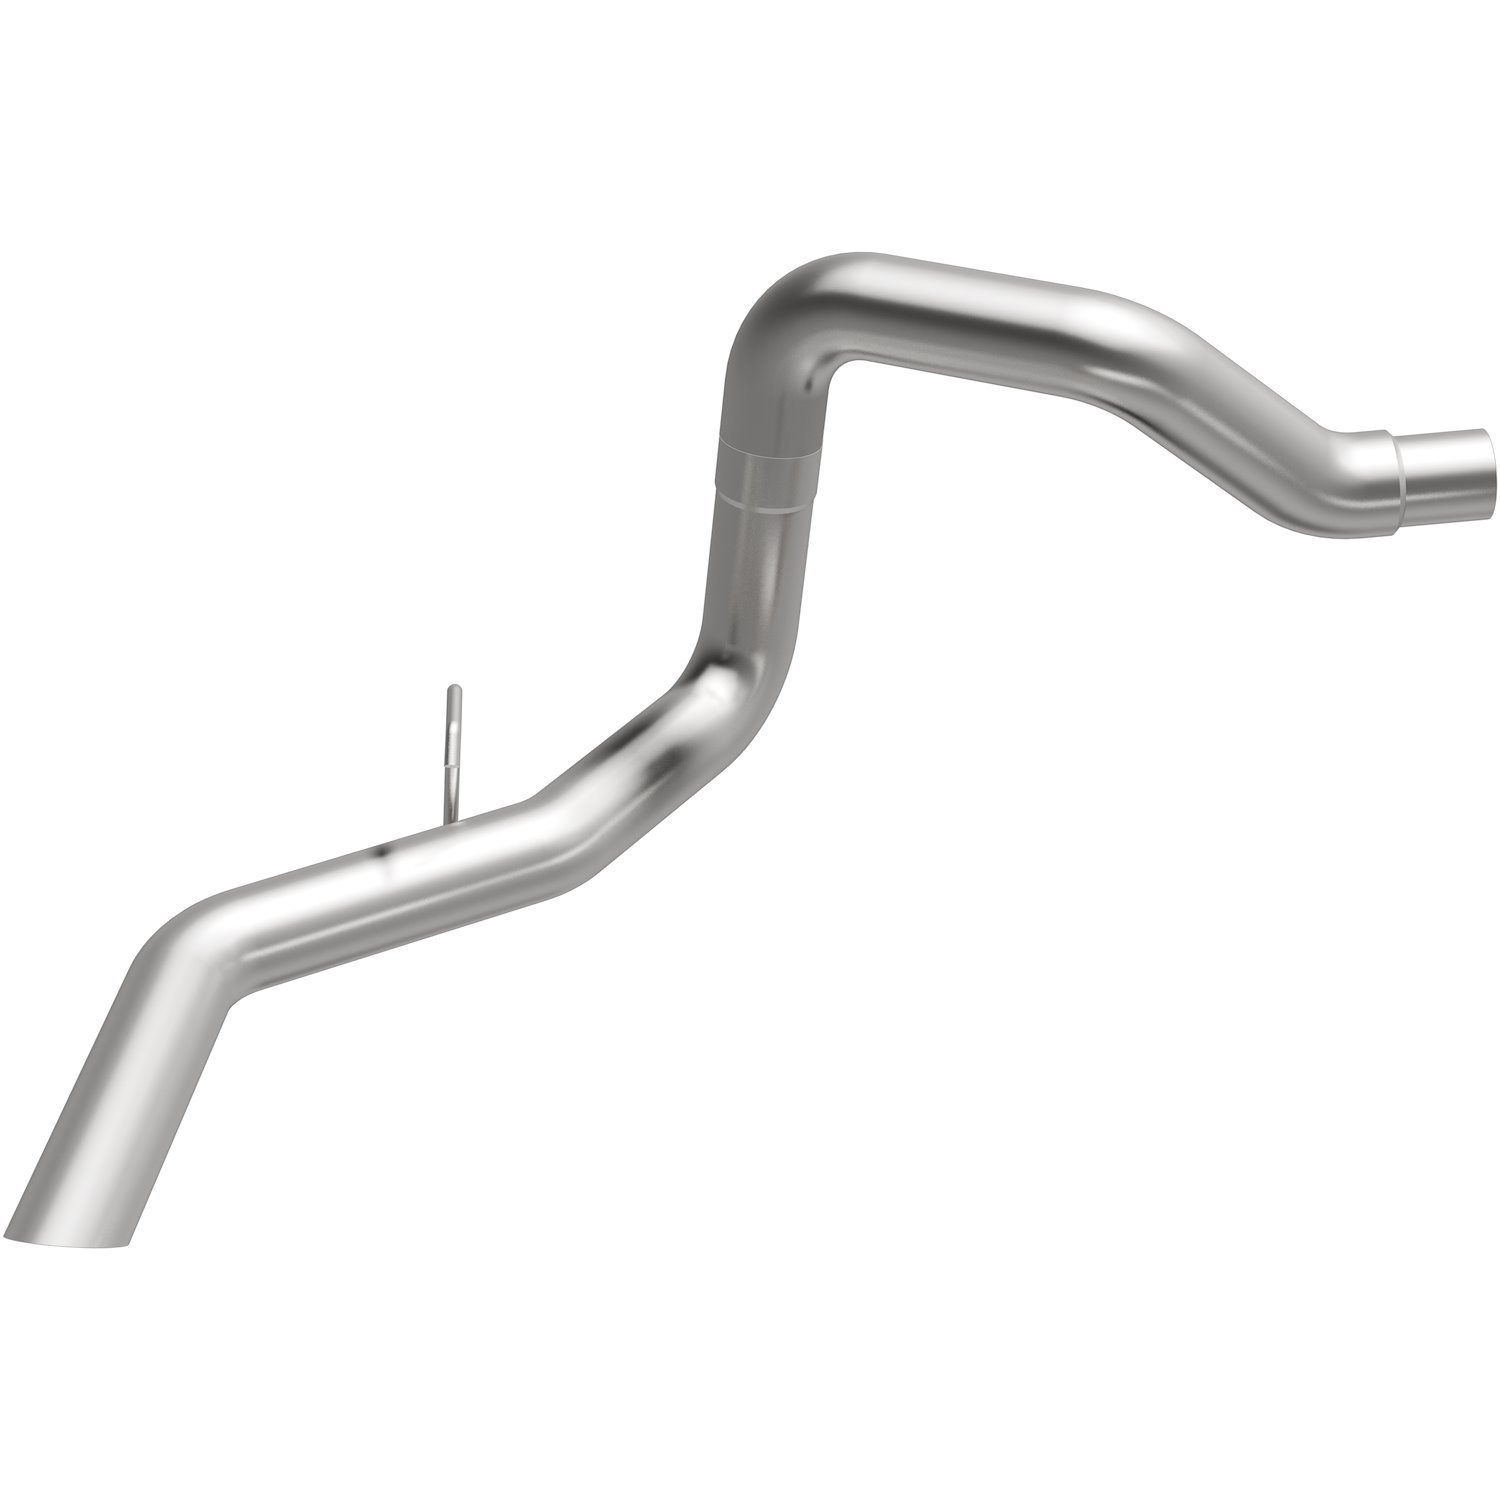 Direct-Fit Exhaust Tail Pipe, 1999-2003 Ford F-250/350 Super-Duty 7.3L